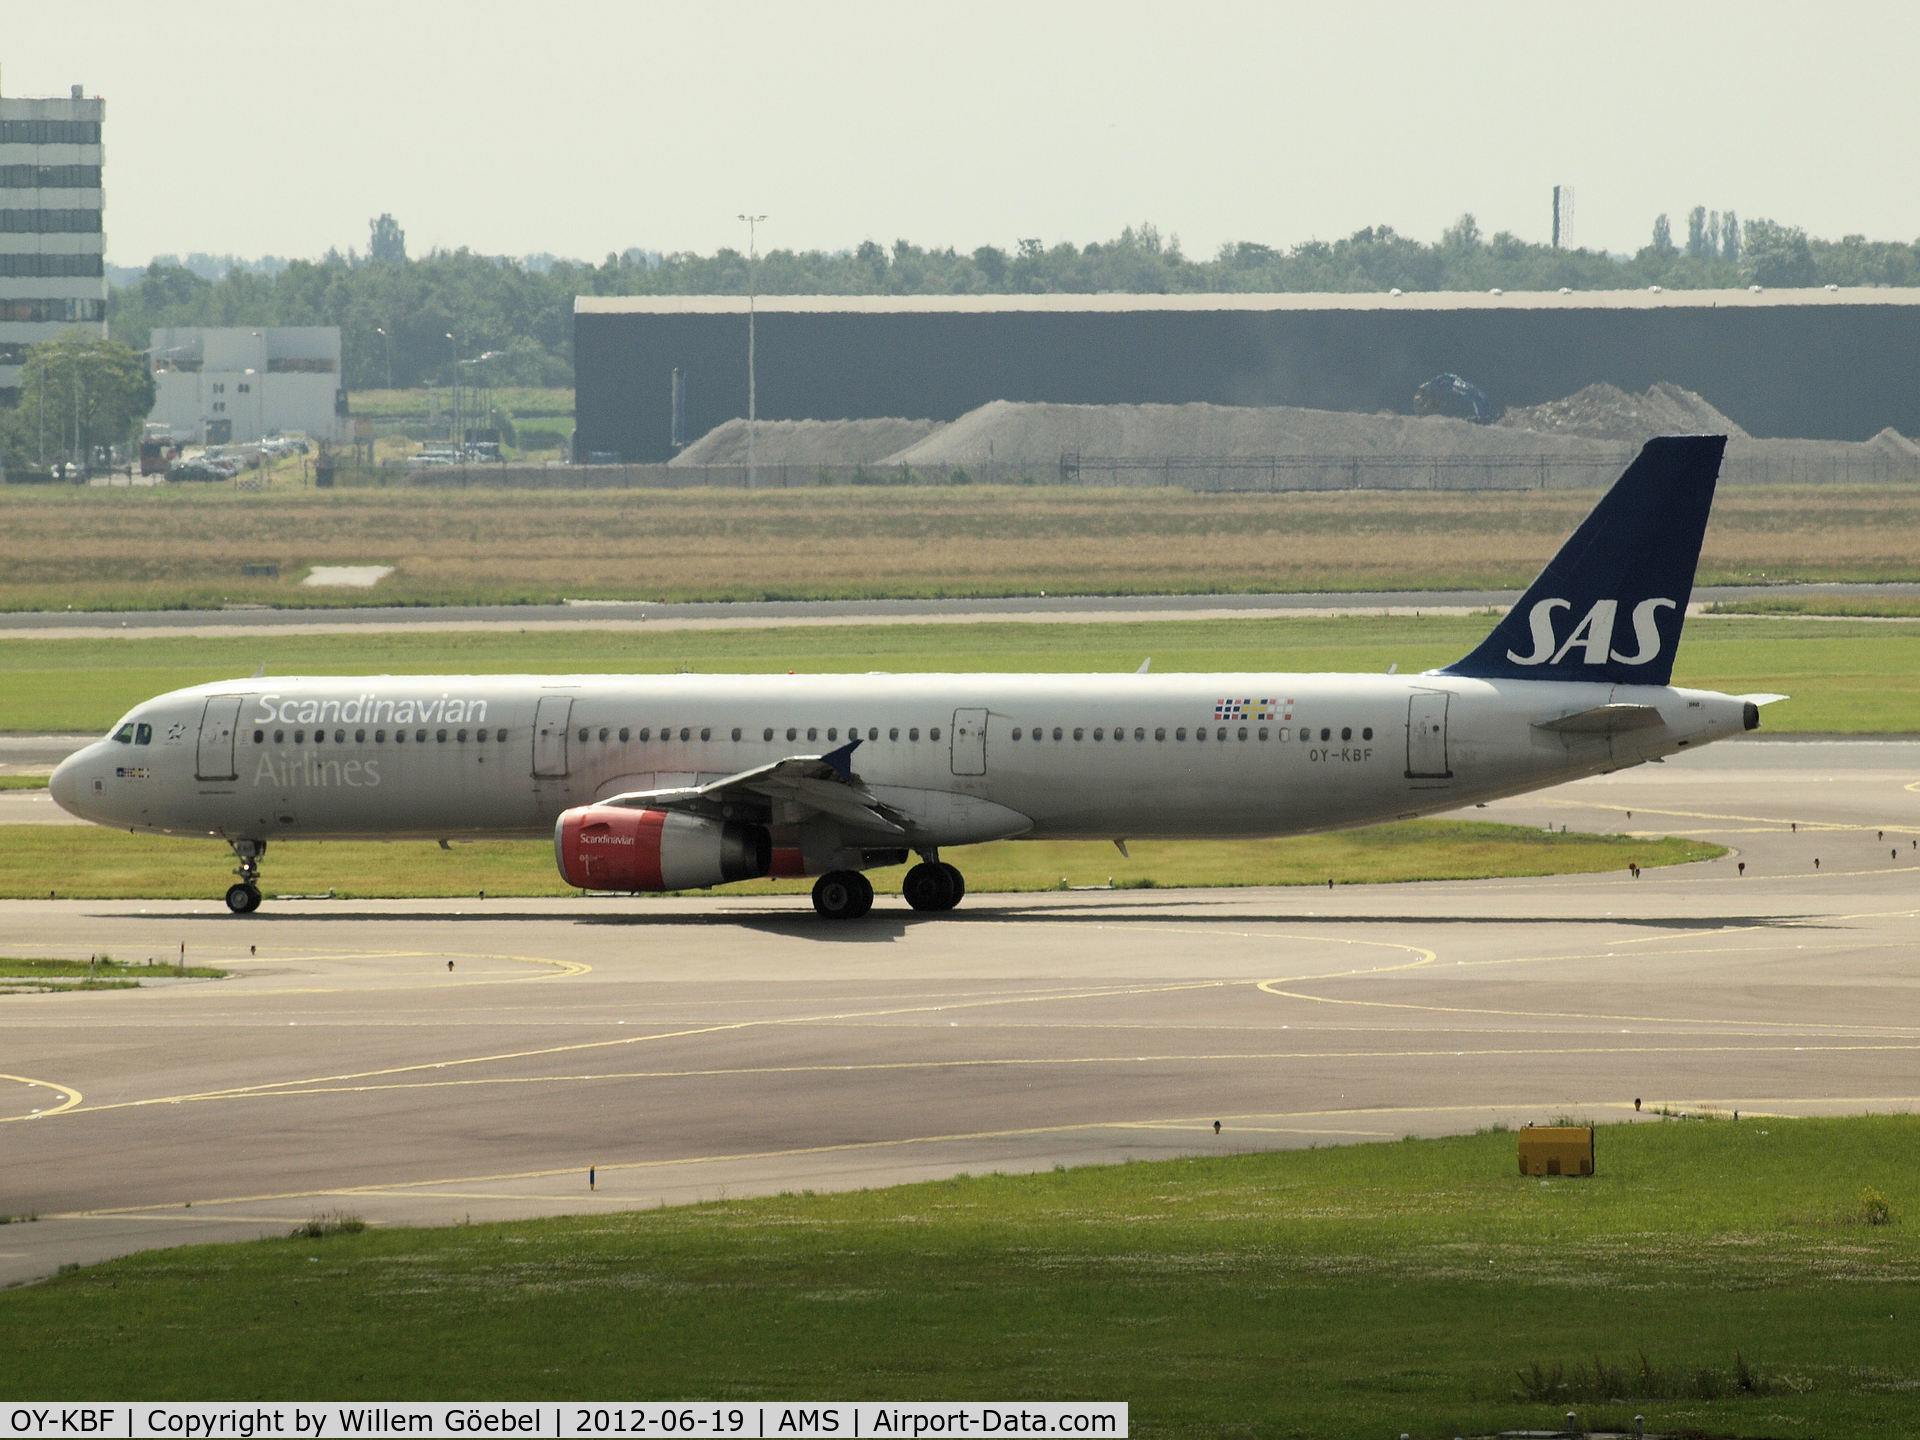 OY-KBF, 2002 Airbus A321-232 C/N 1807, Taxi to runway 24 of Schiphol Airport